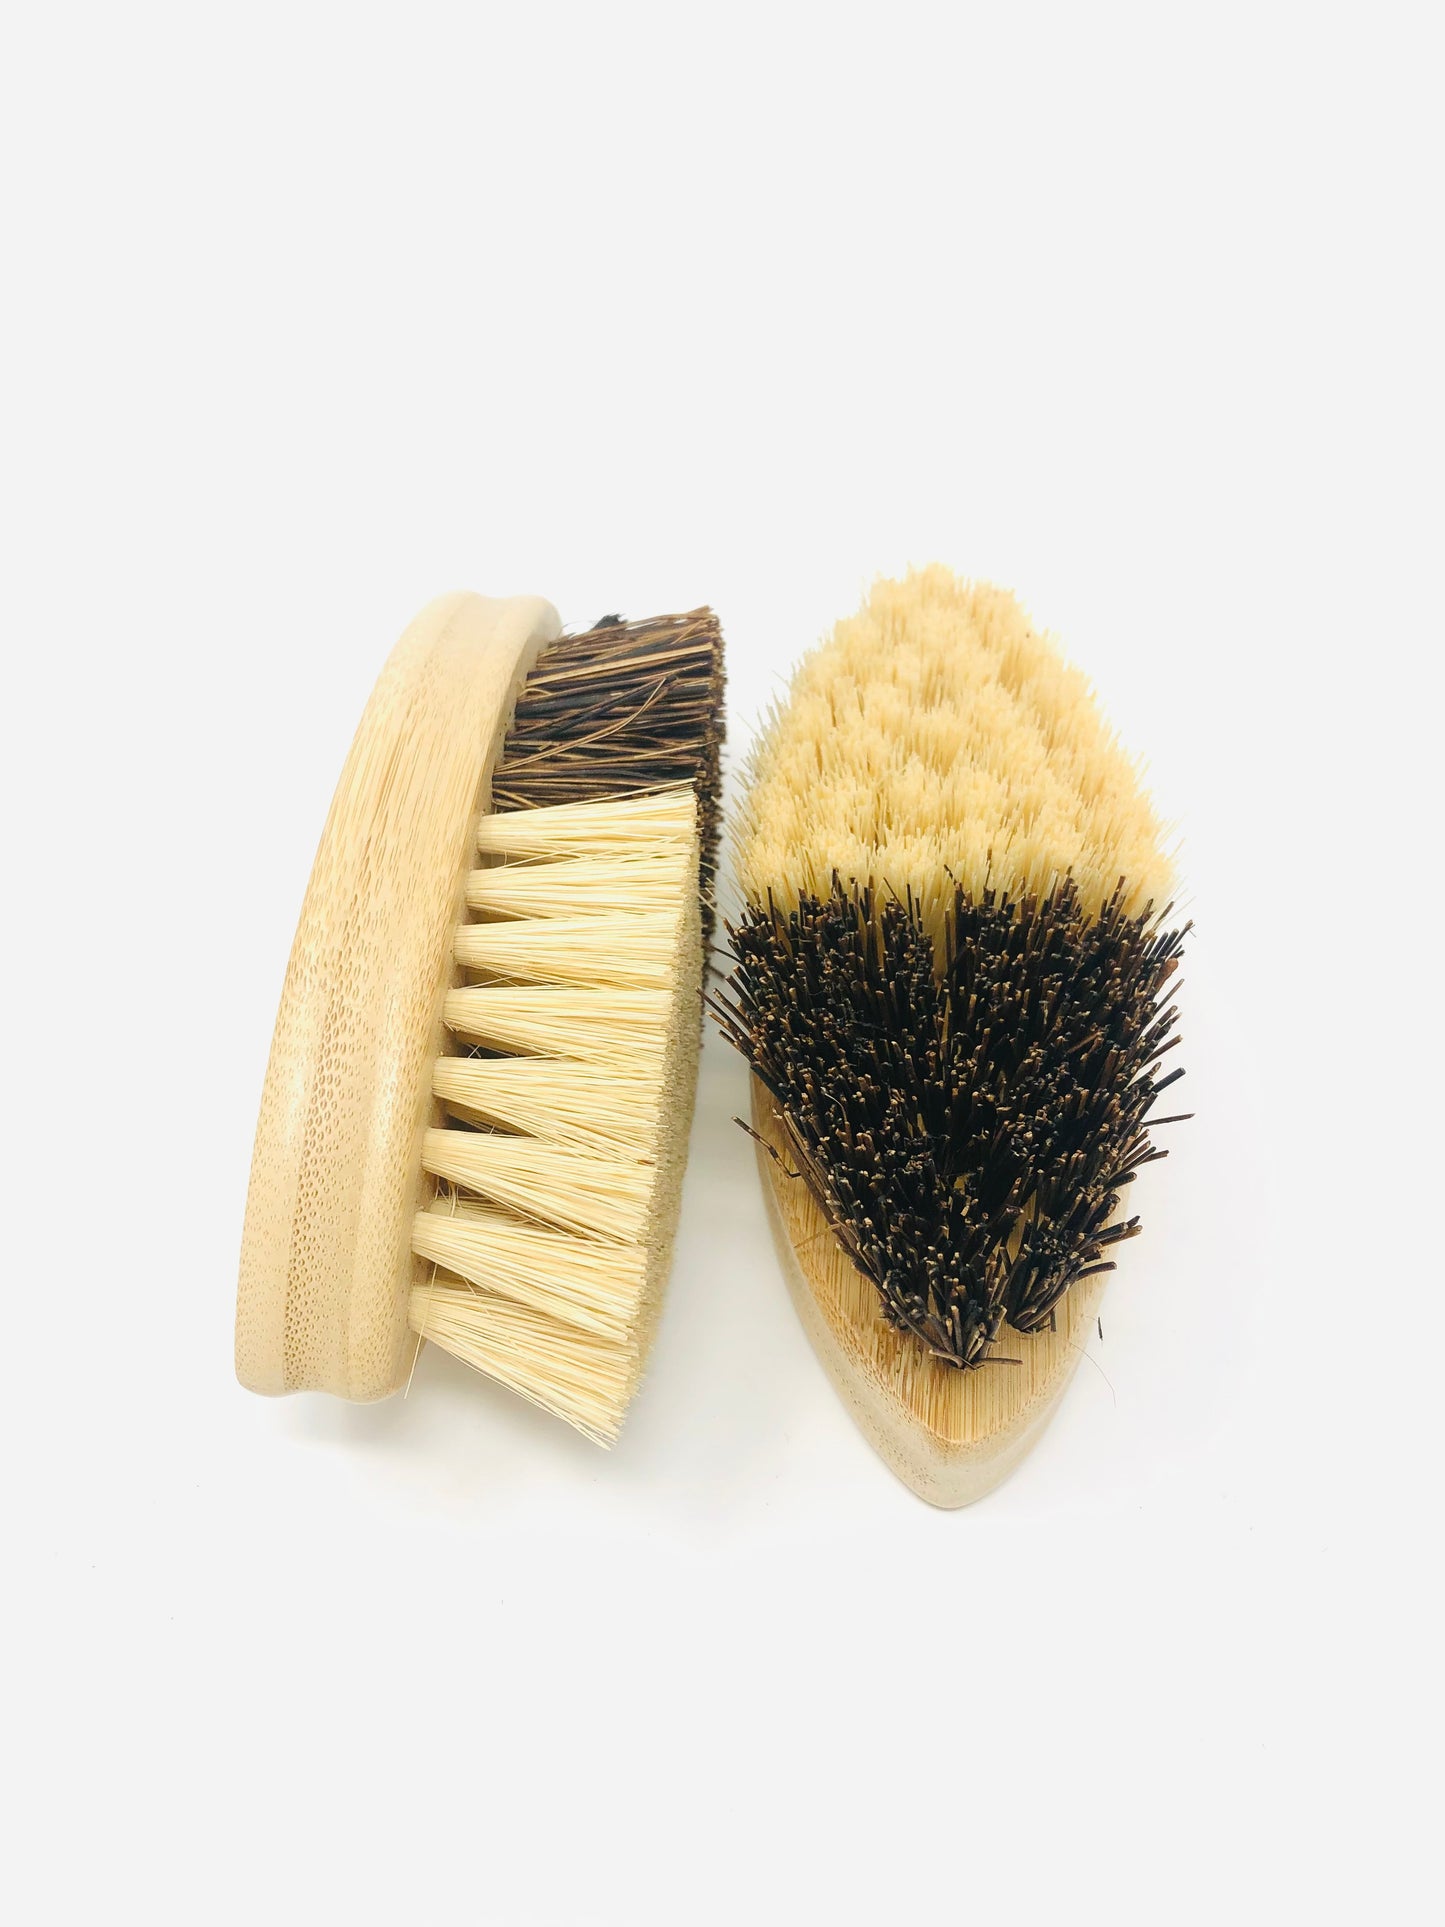 All-Purpose Cleaning Brush